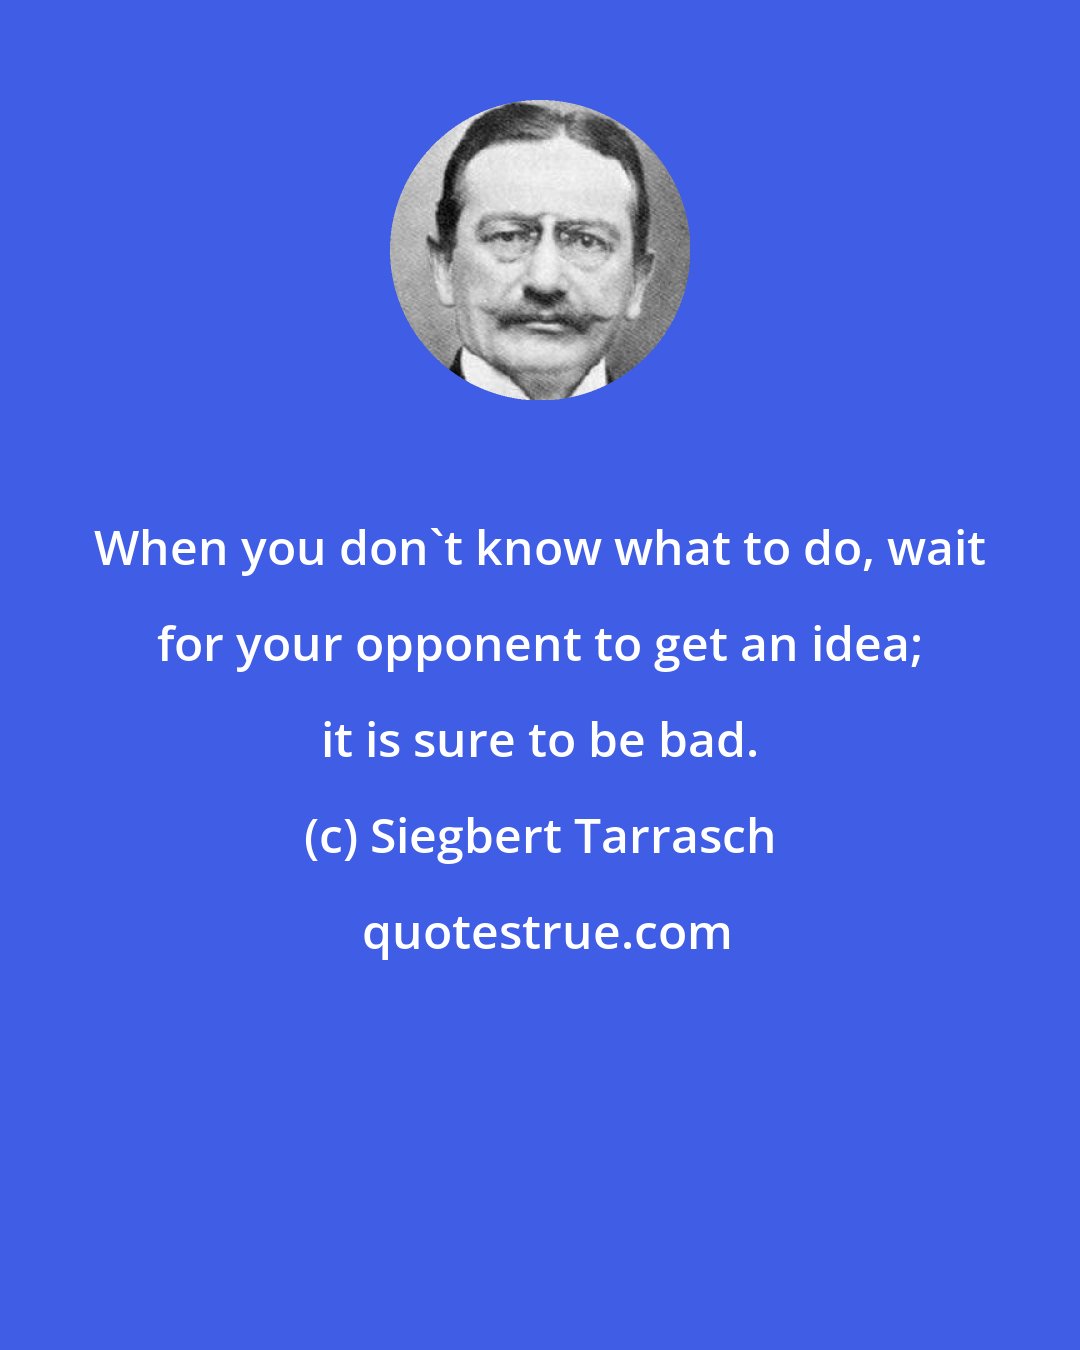 Siegbert Tarrasch: When you don't know what to do, wait for your opponent to get an idea; it is sure to be bad.